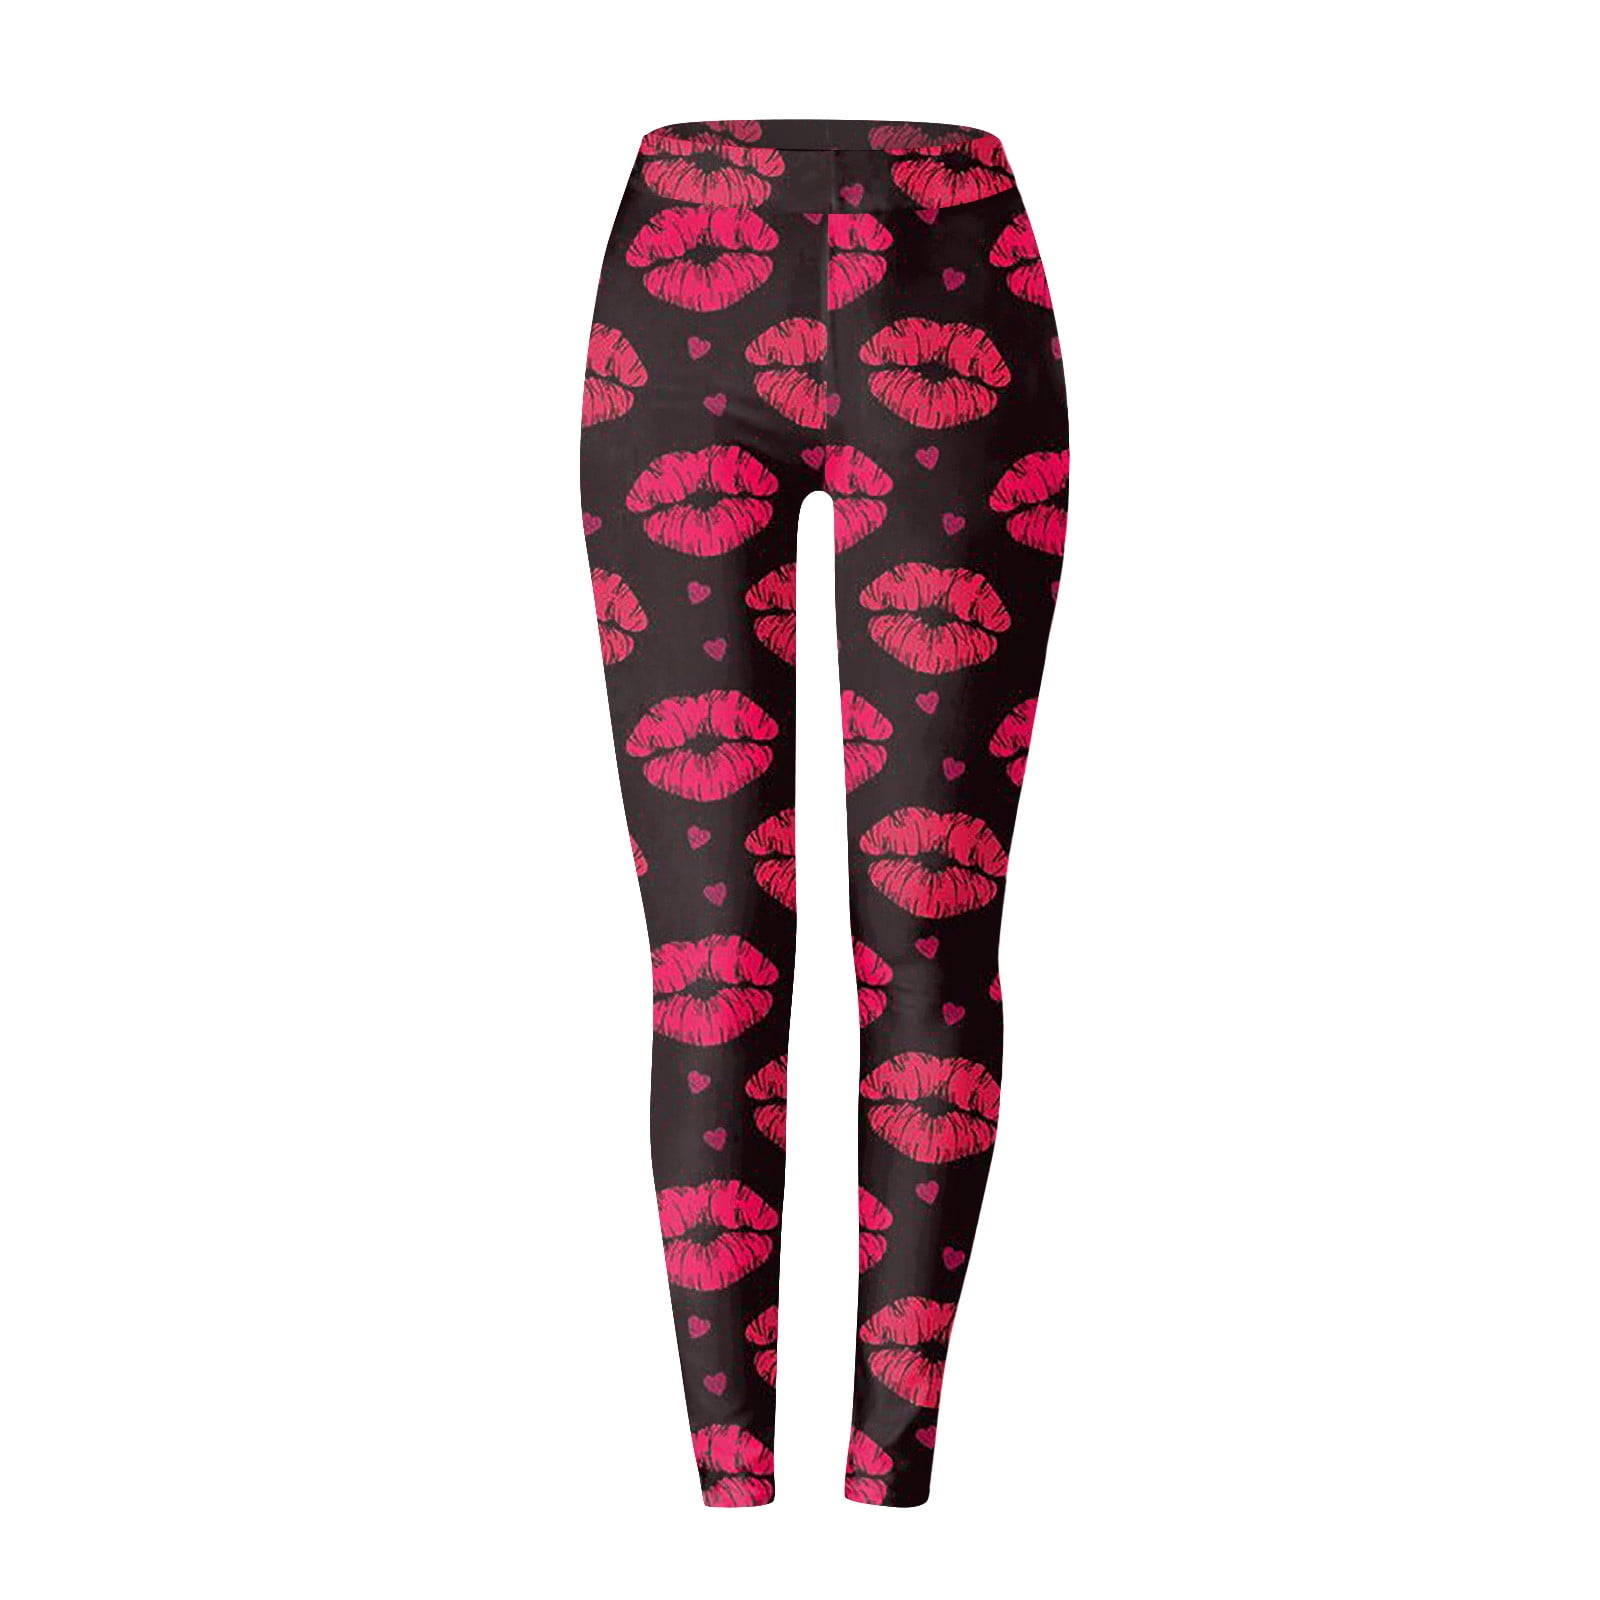 Female Compression Leggings Tights Casual Comfort Pants Heart